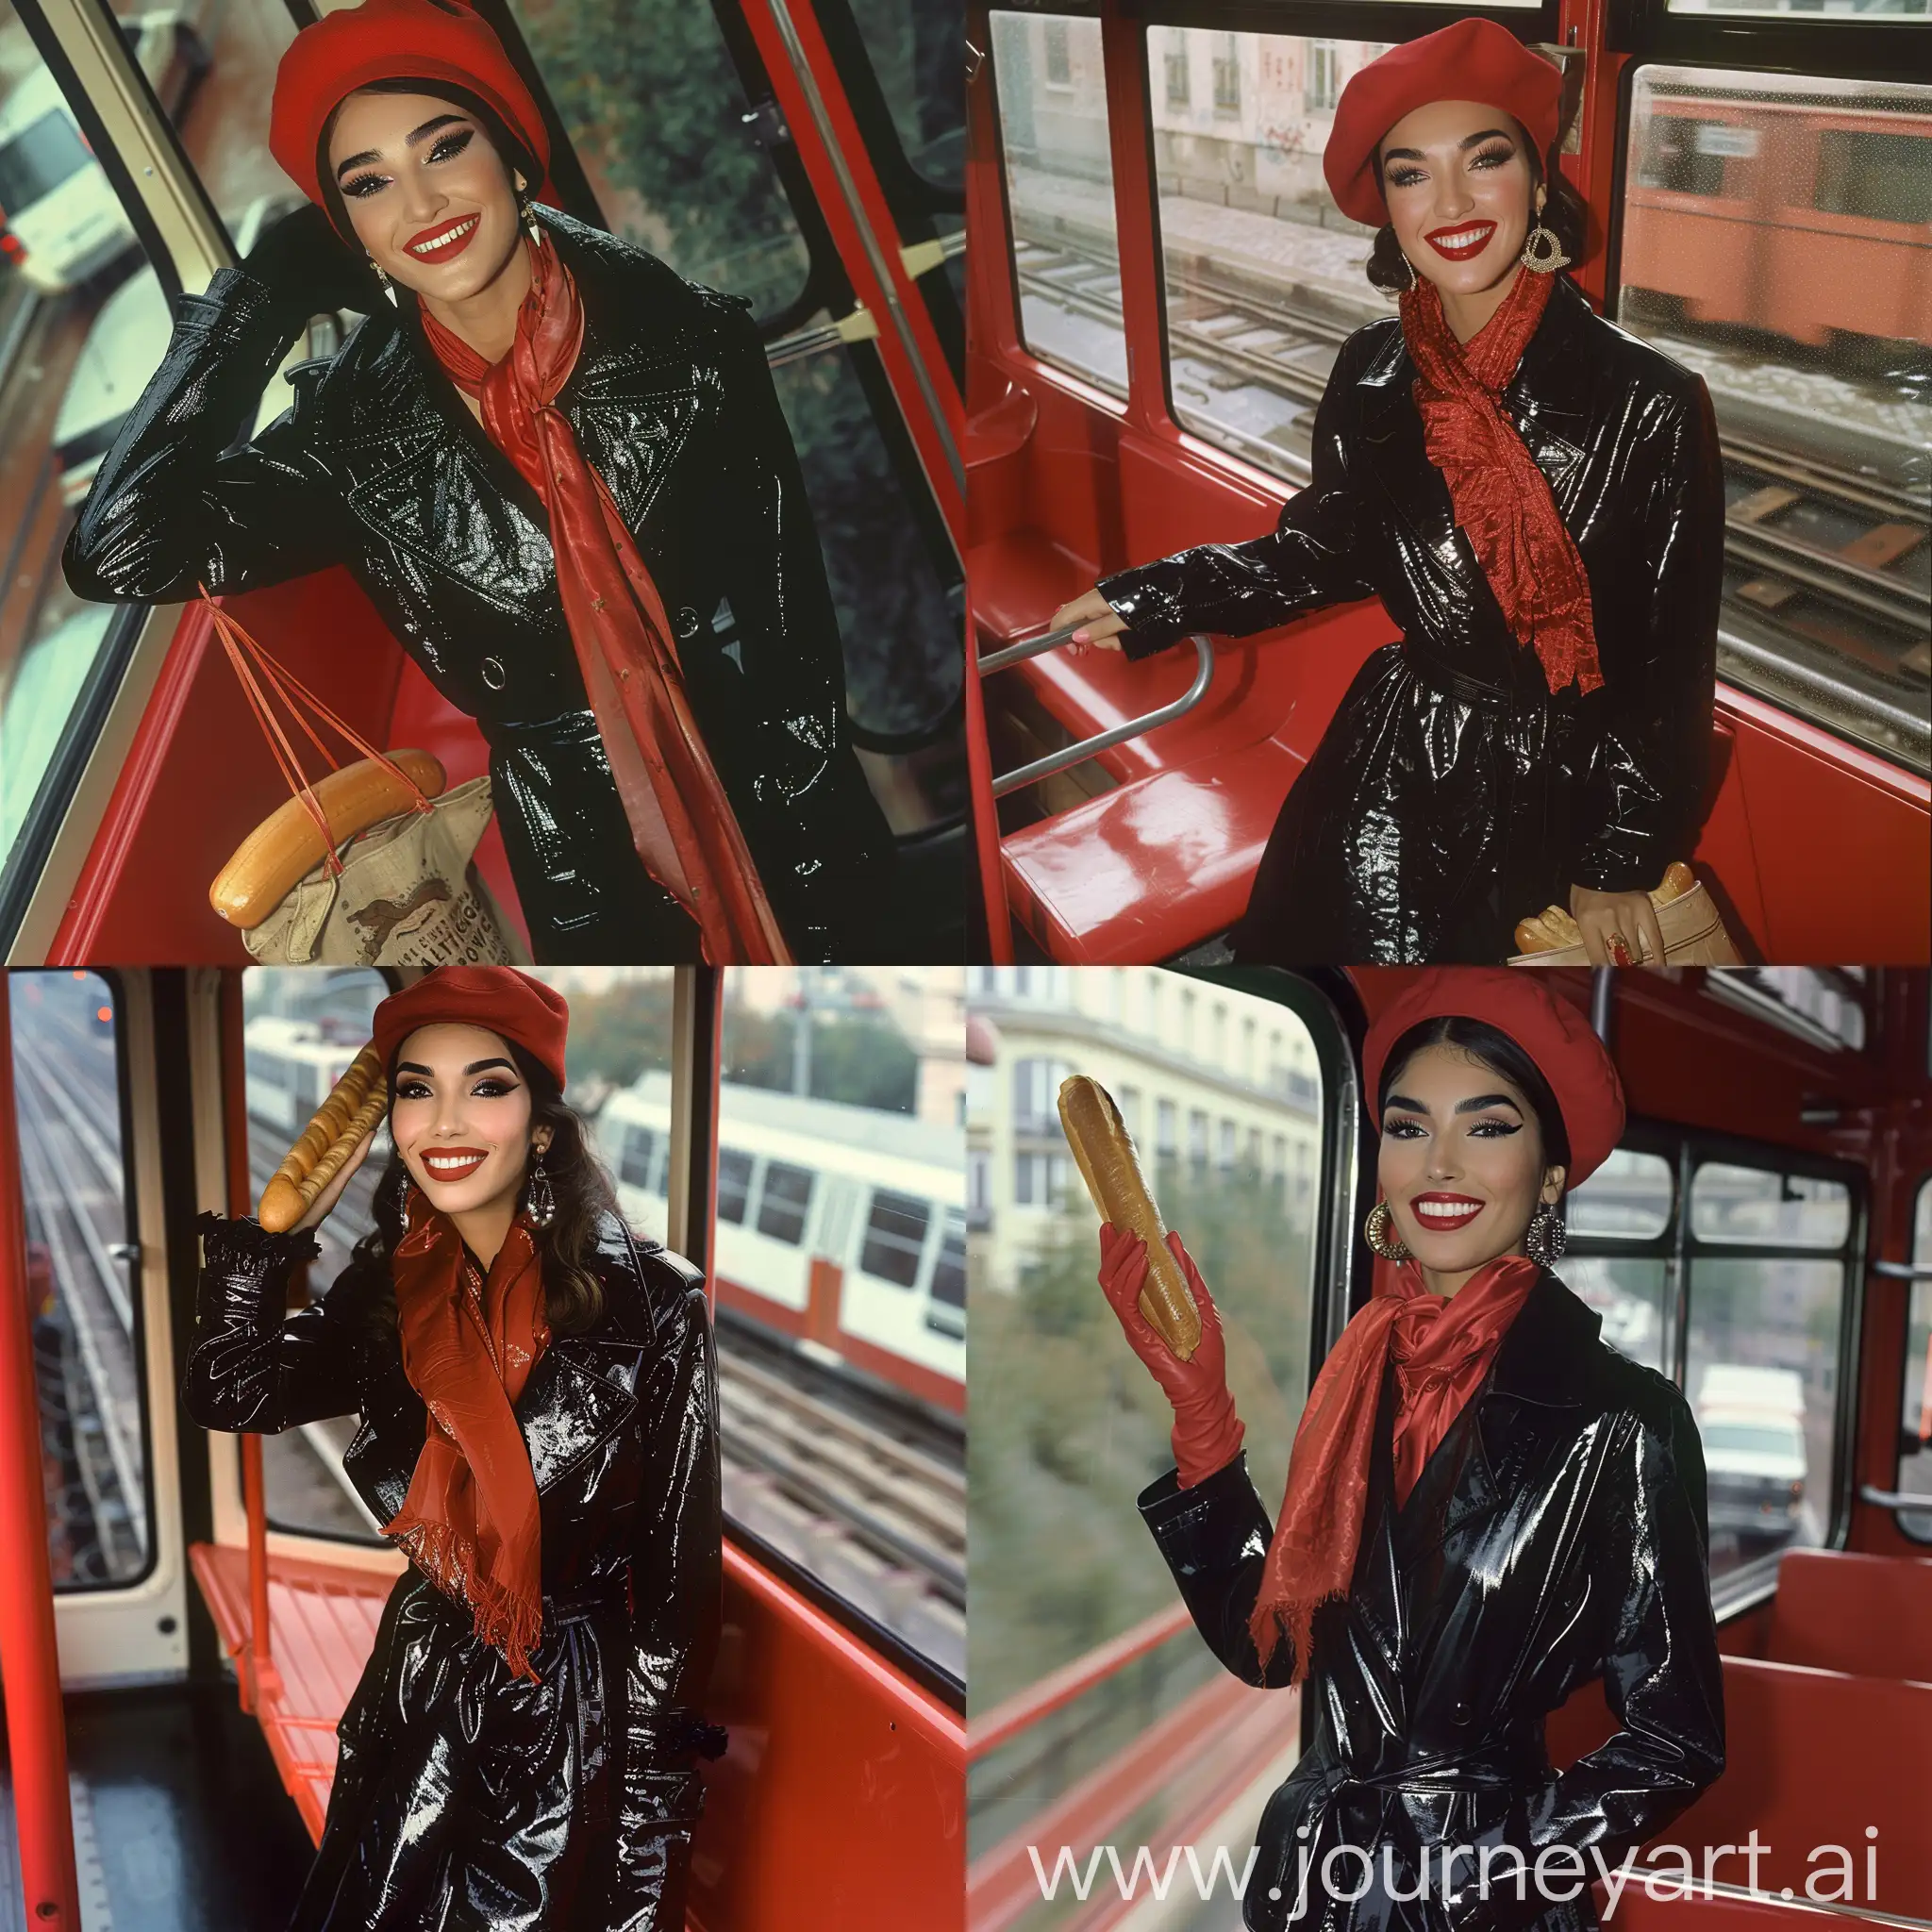 Elegant-Turkish-Woman-in-Balenciaga-Fashion-with-Baguette-on-Red-Tram